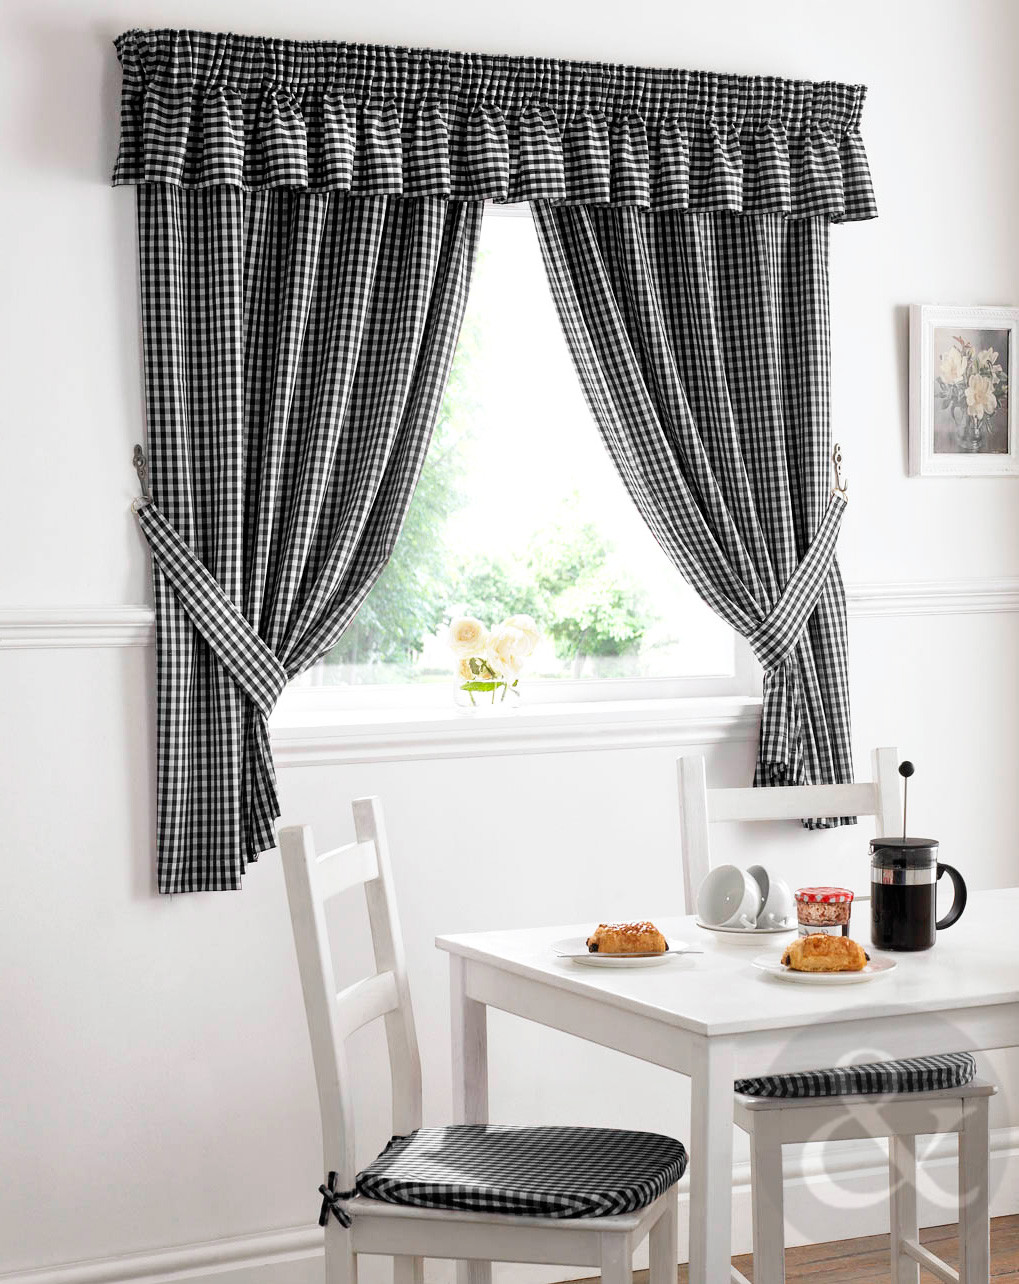 Gingham Kitchen Curtains
 Gingham Check Kitchen Curtains Ready Made Pencil Pleat Net